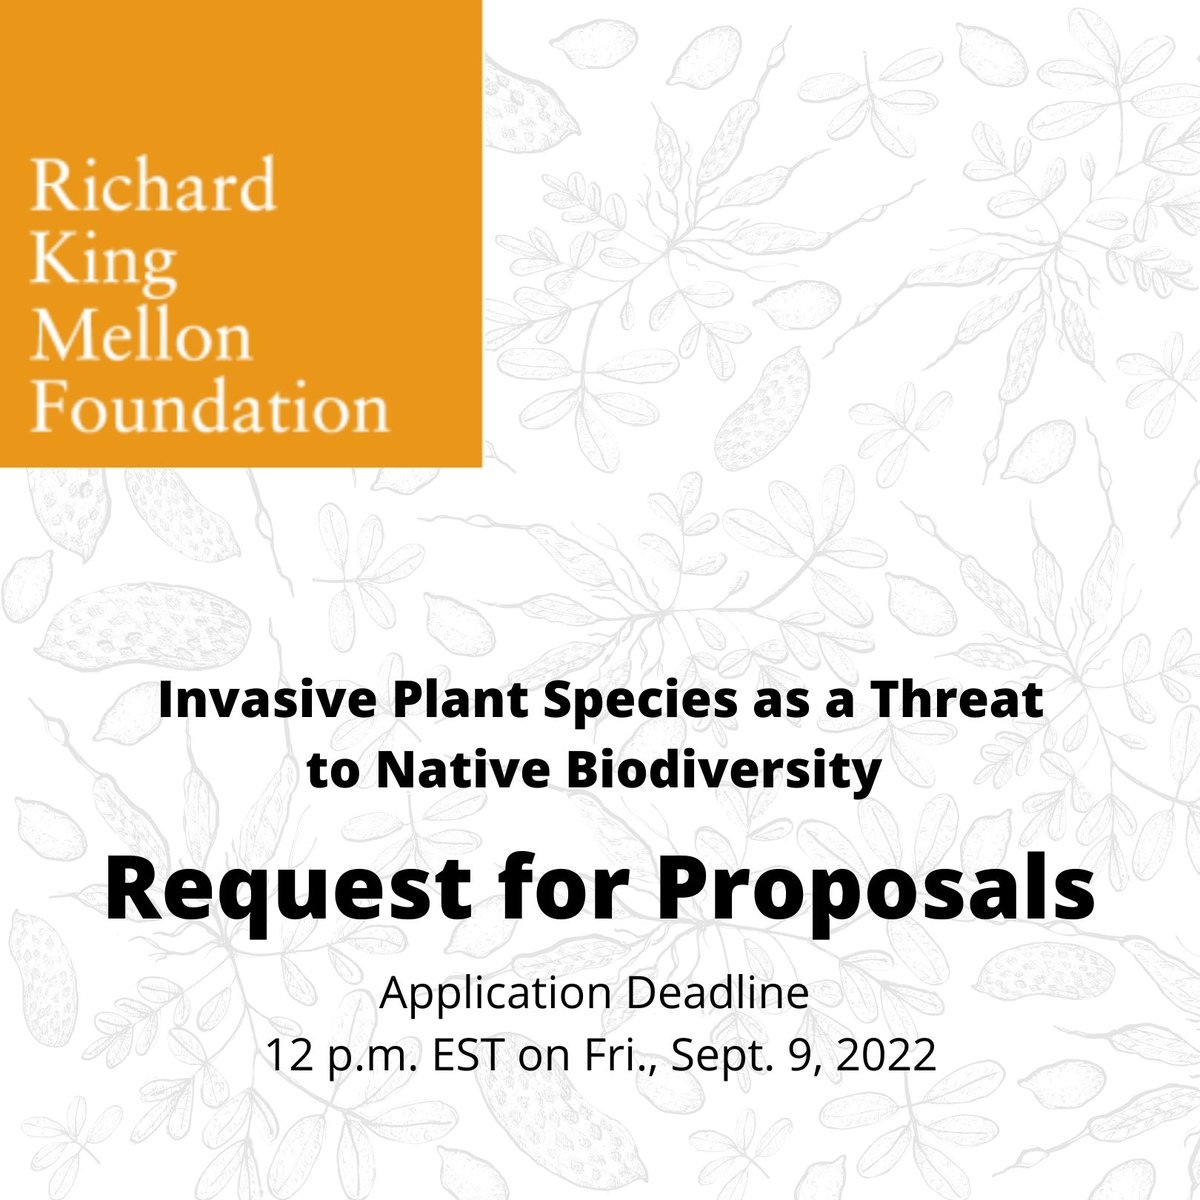 The Richard King Mellon Foundation has just released a Request for Proposal (RFP) to fund projects designed to slow or stop the spread of harmful invasive plants in the United States. The deadline is Sept. 9, 2022. Learn more: bit.ly/NAA22RMRFP